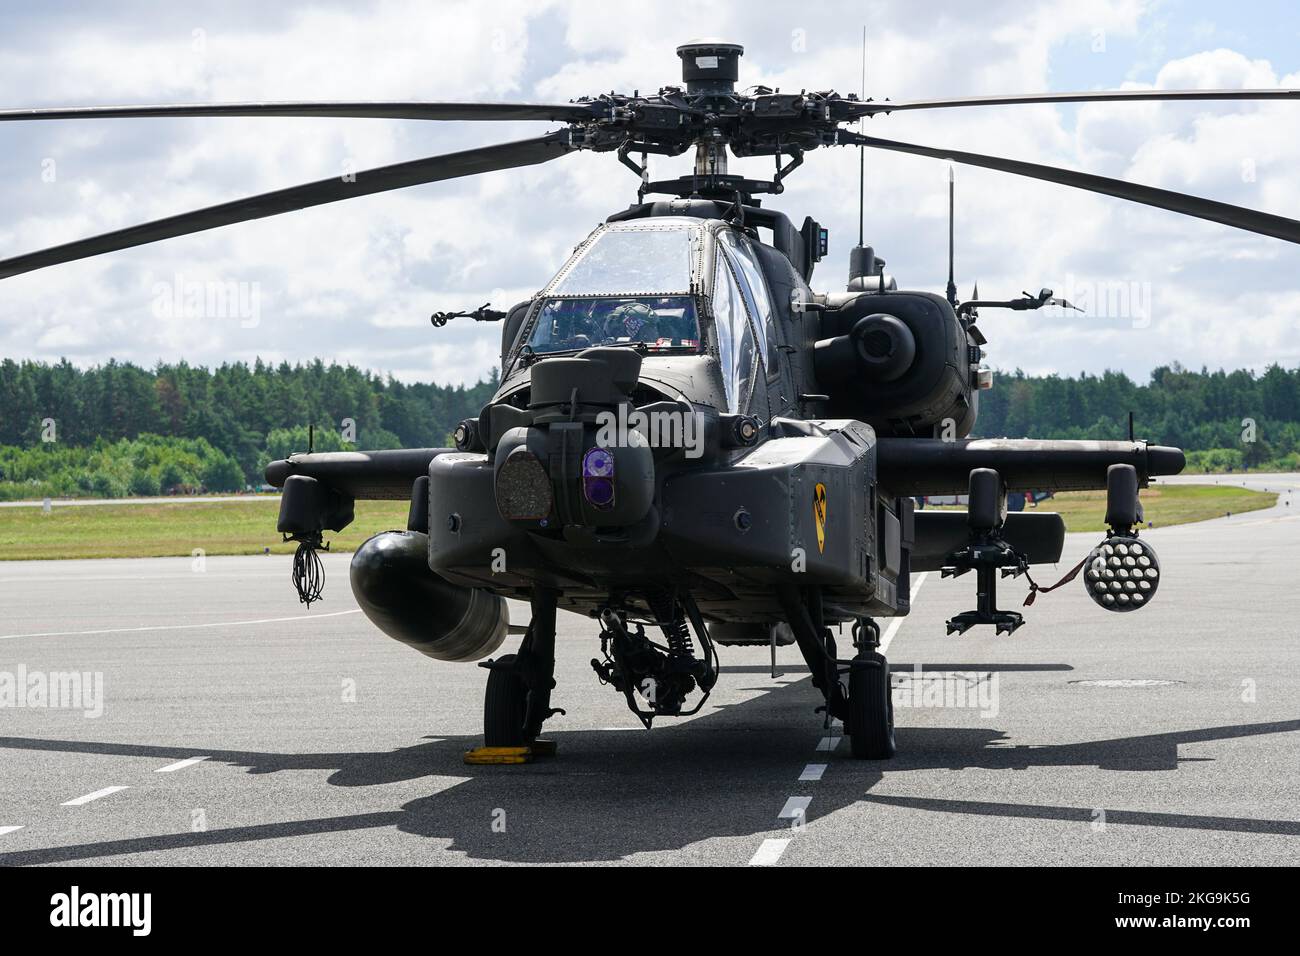 Liepaja, Latvia - August 07, 2022: AH-64D Apache attack helicopter from United States army after landing at the airport runway Stock Photo